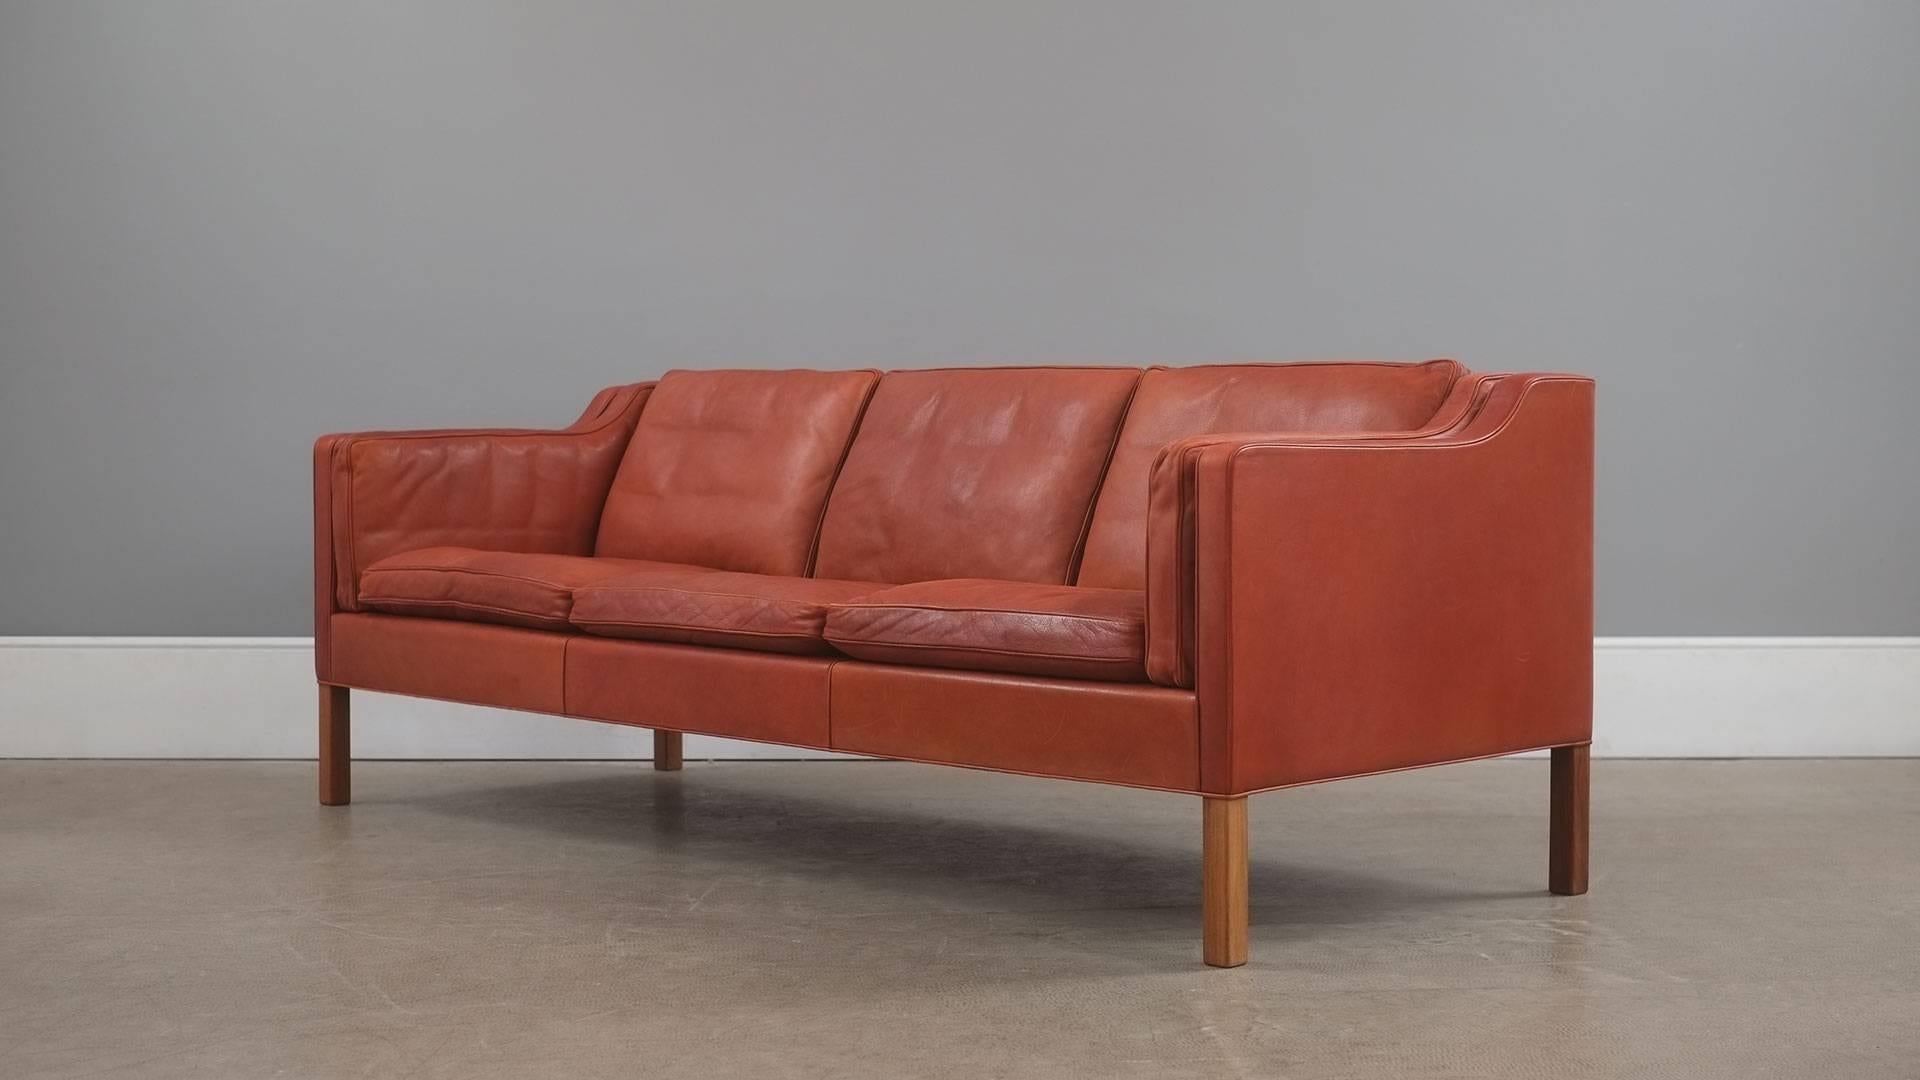 The real thing… Fantastic early example of the Classic three-seat sofa designed by Børge Mogensen for Fredericia, Denmark model 2213. This example in wonderful and super rare thick cognac analine leather with perfect patina. Originally purchased in